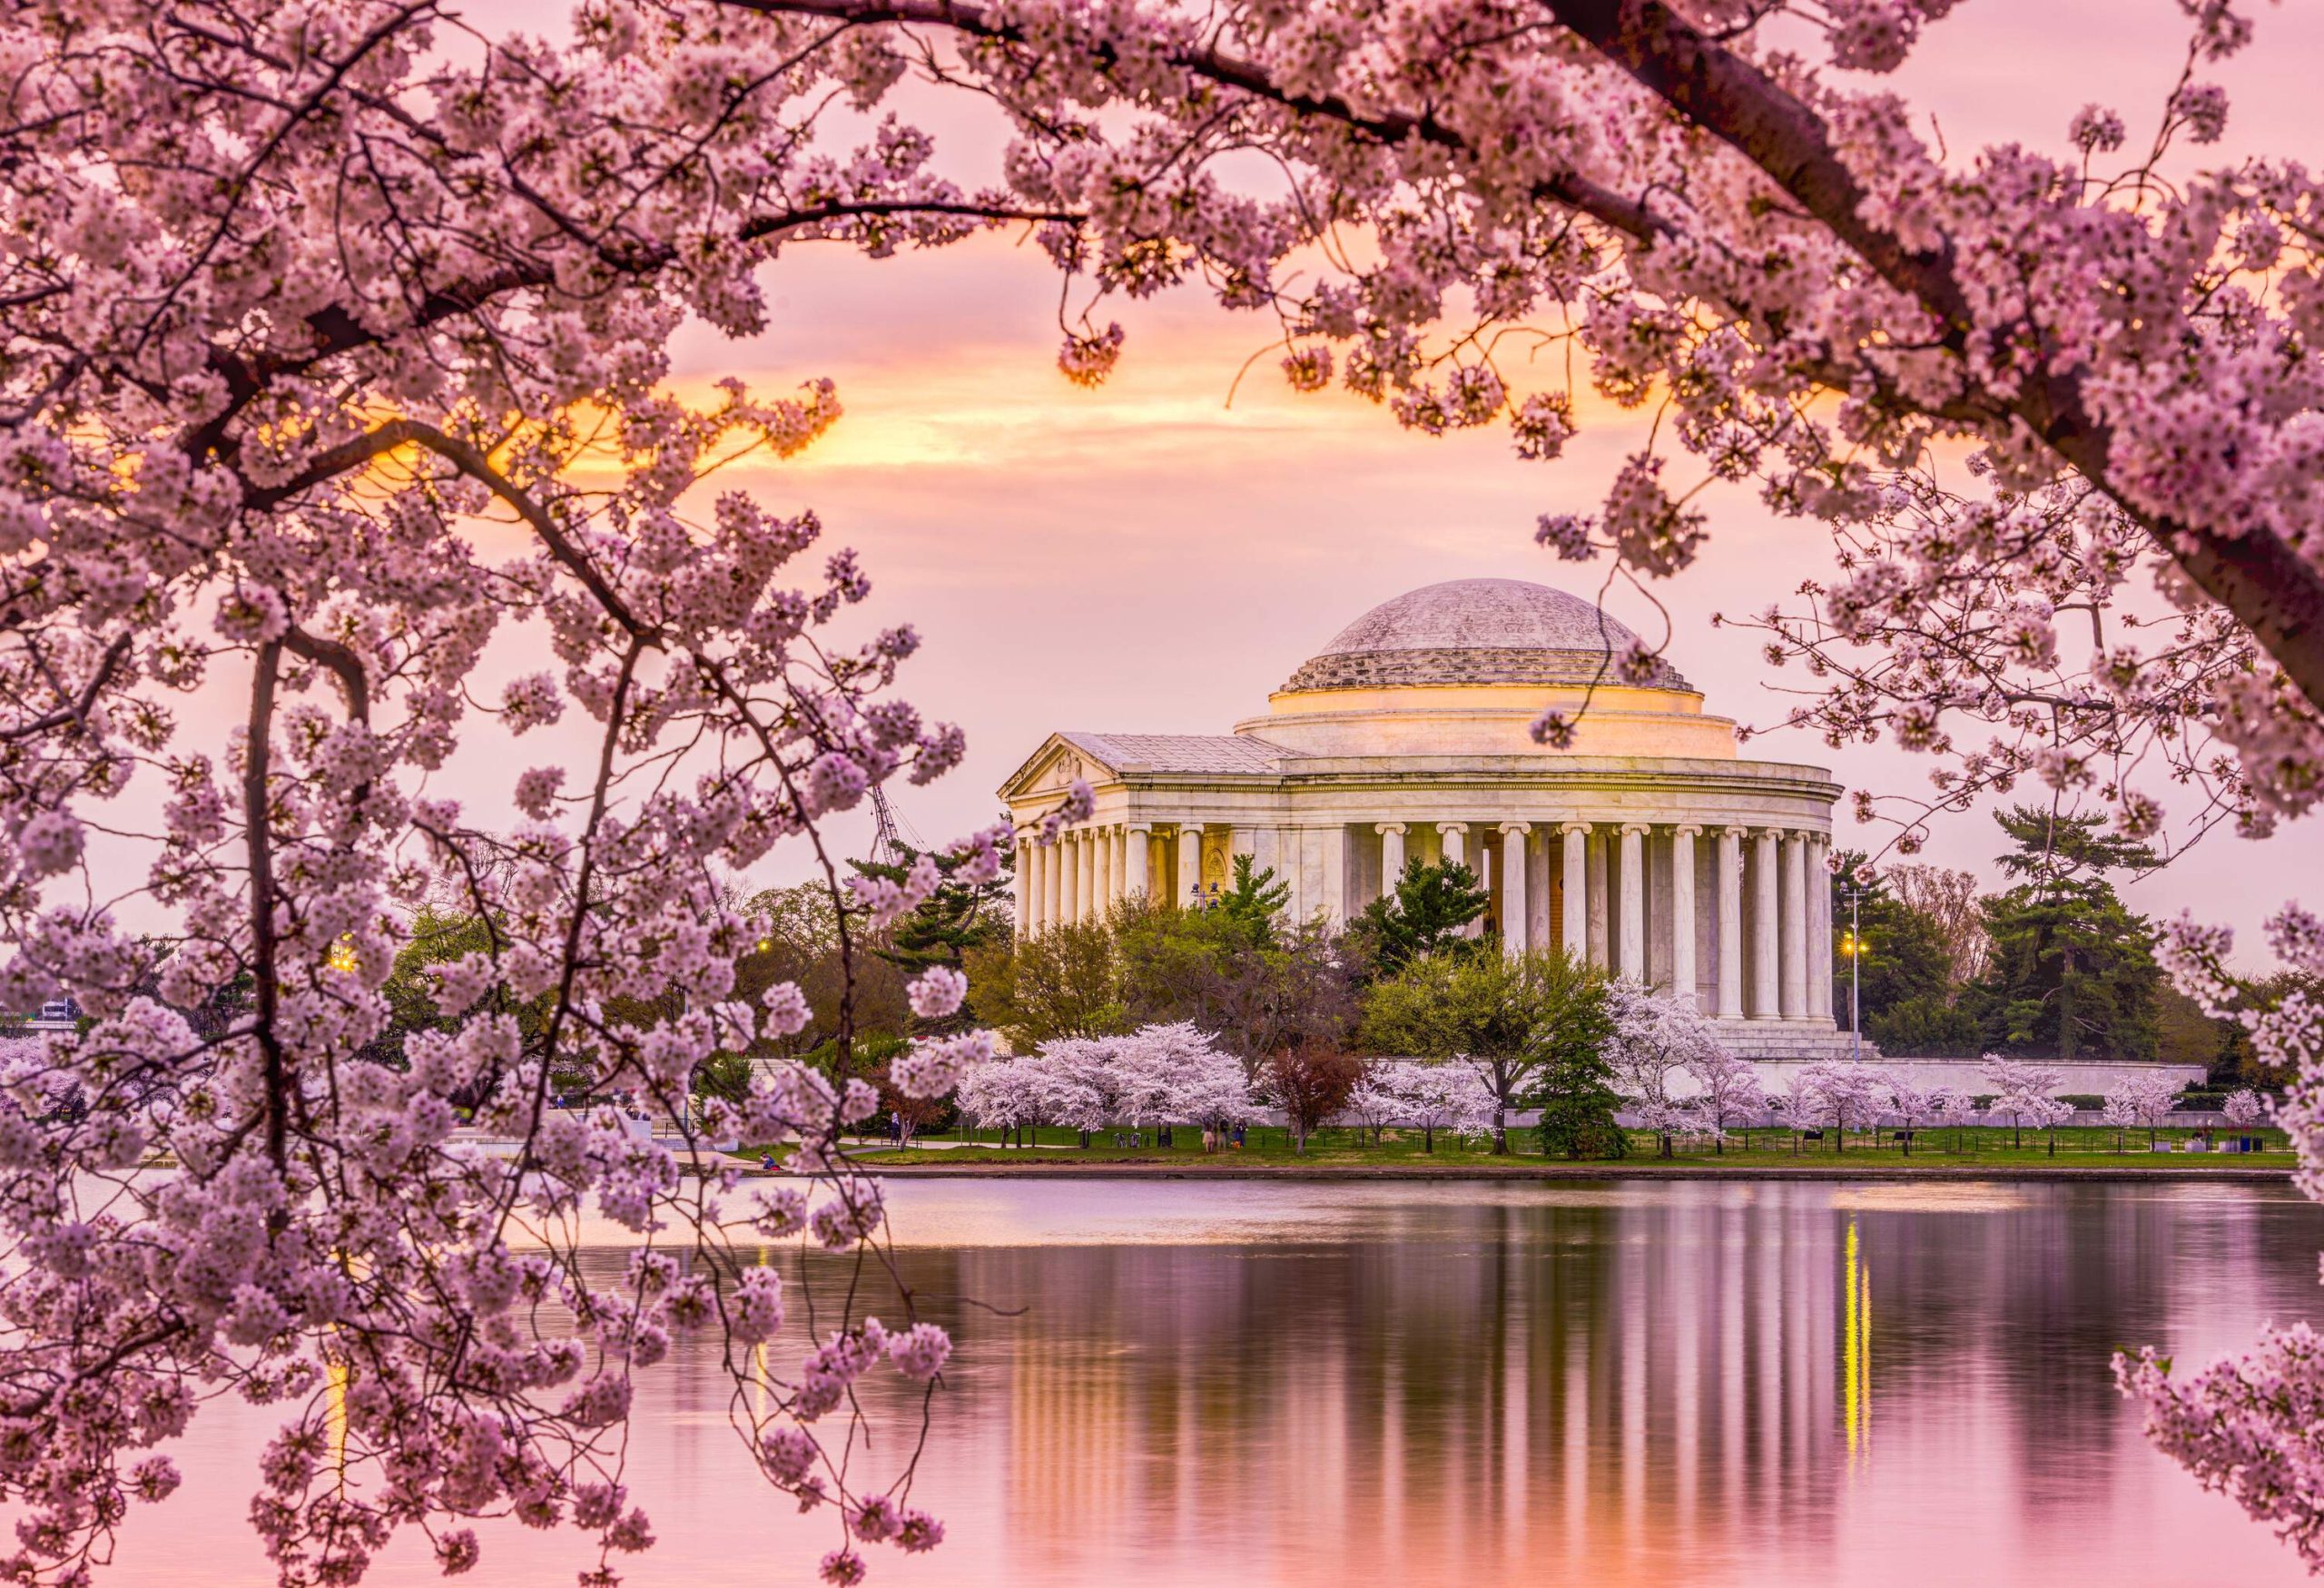 Picturesque view of a columned dome reminiscent of Rome's Pantheon, situated on a man-made reservoir adorned with blooming cherry blossoms.